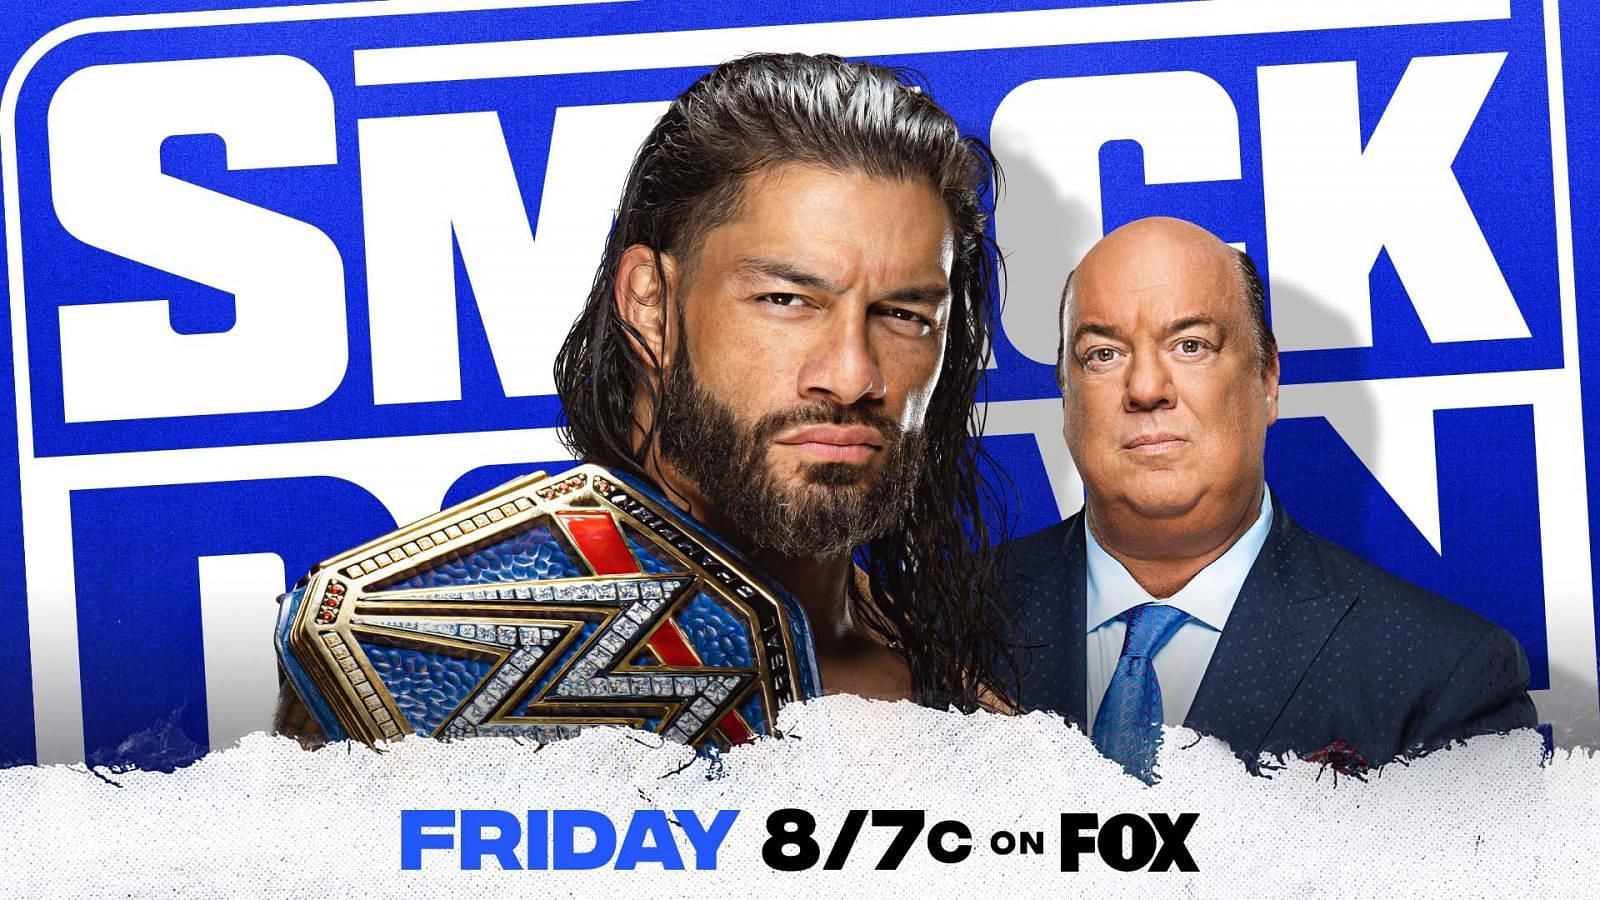 Roman Reigns and Paul Heyman will be on SmackDown